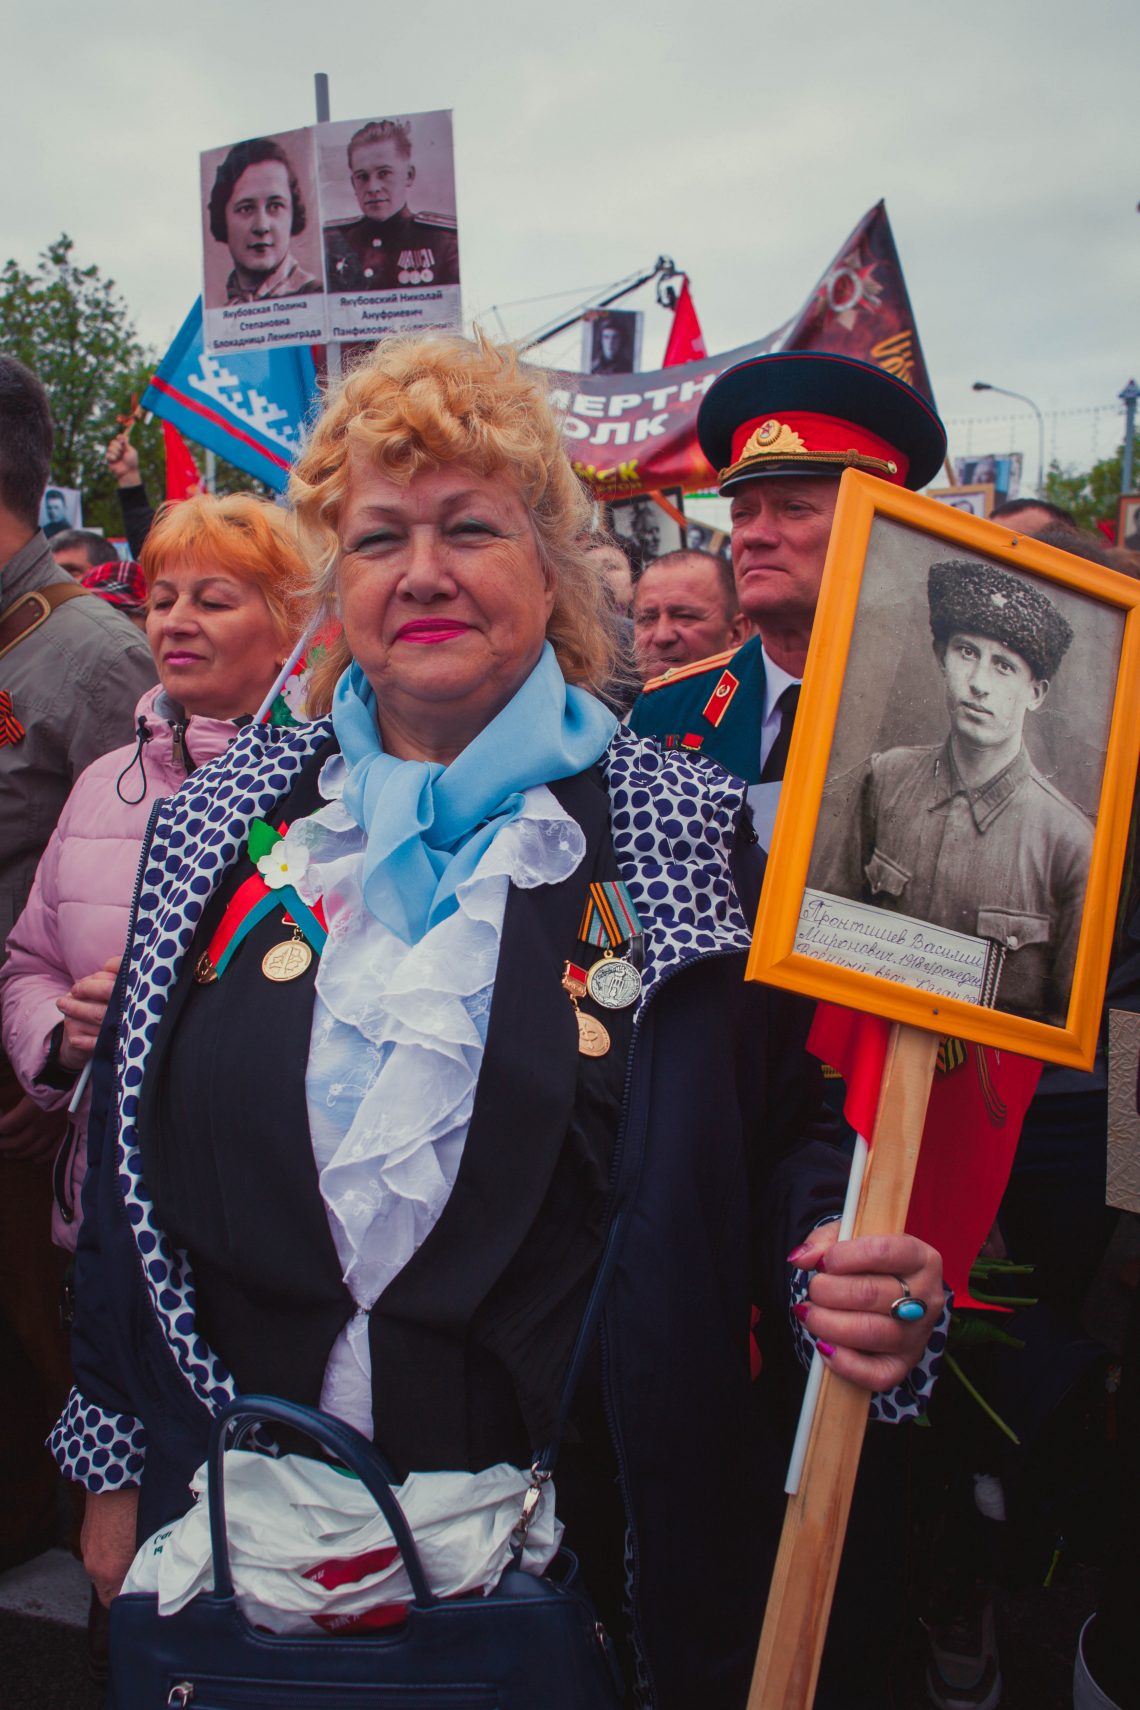 May 9 celebration in Minsk by its characters  // BeLarus